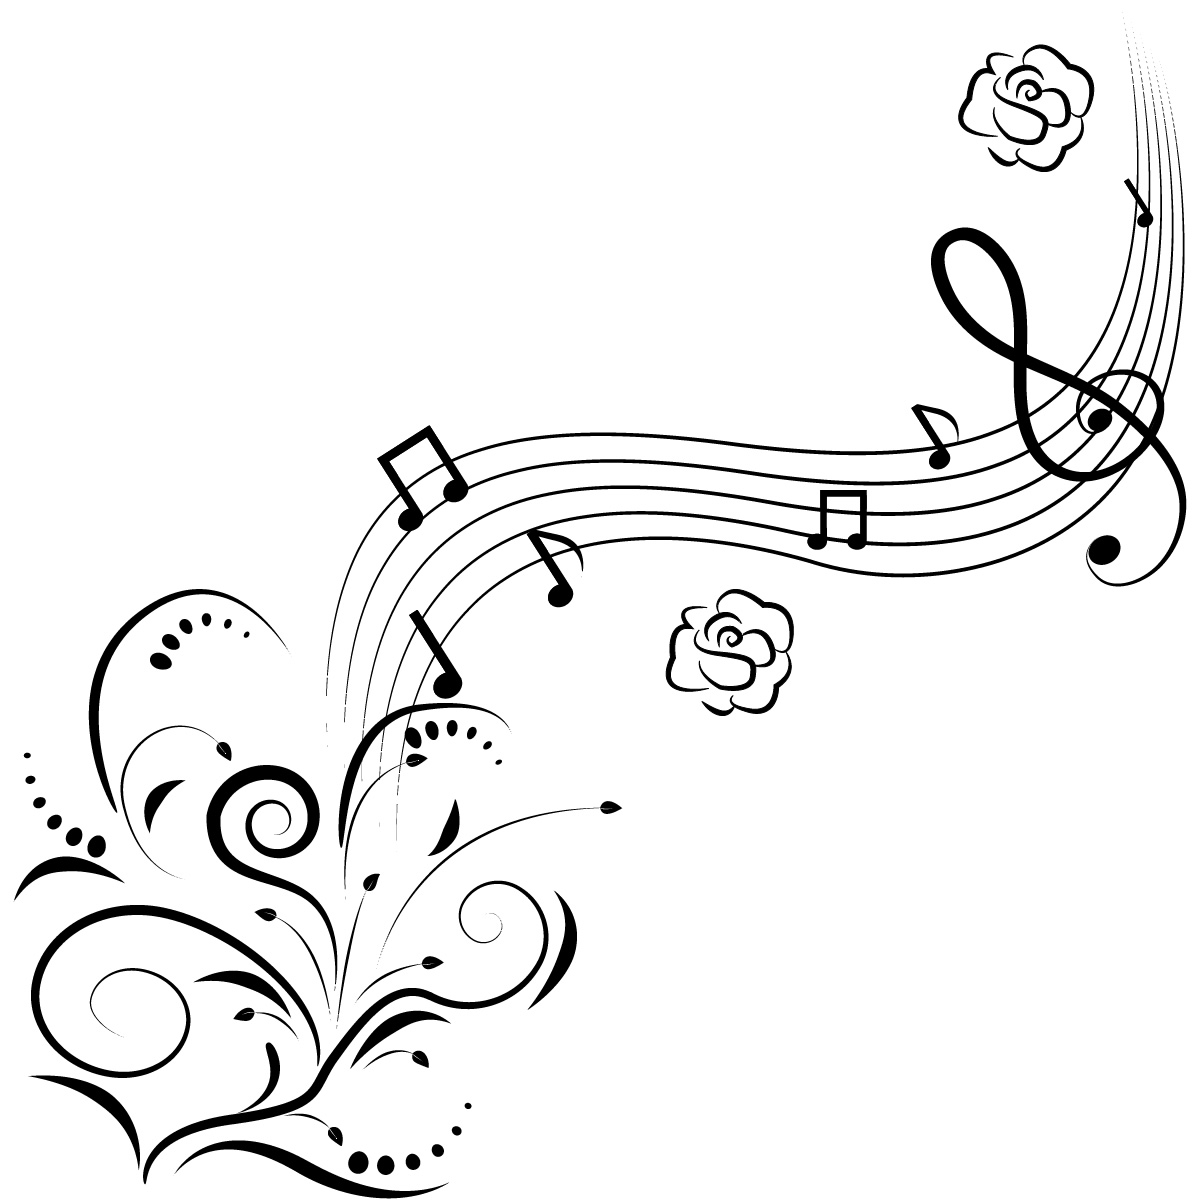 Music-Note-Coloring-Page- 